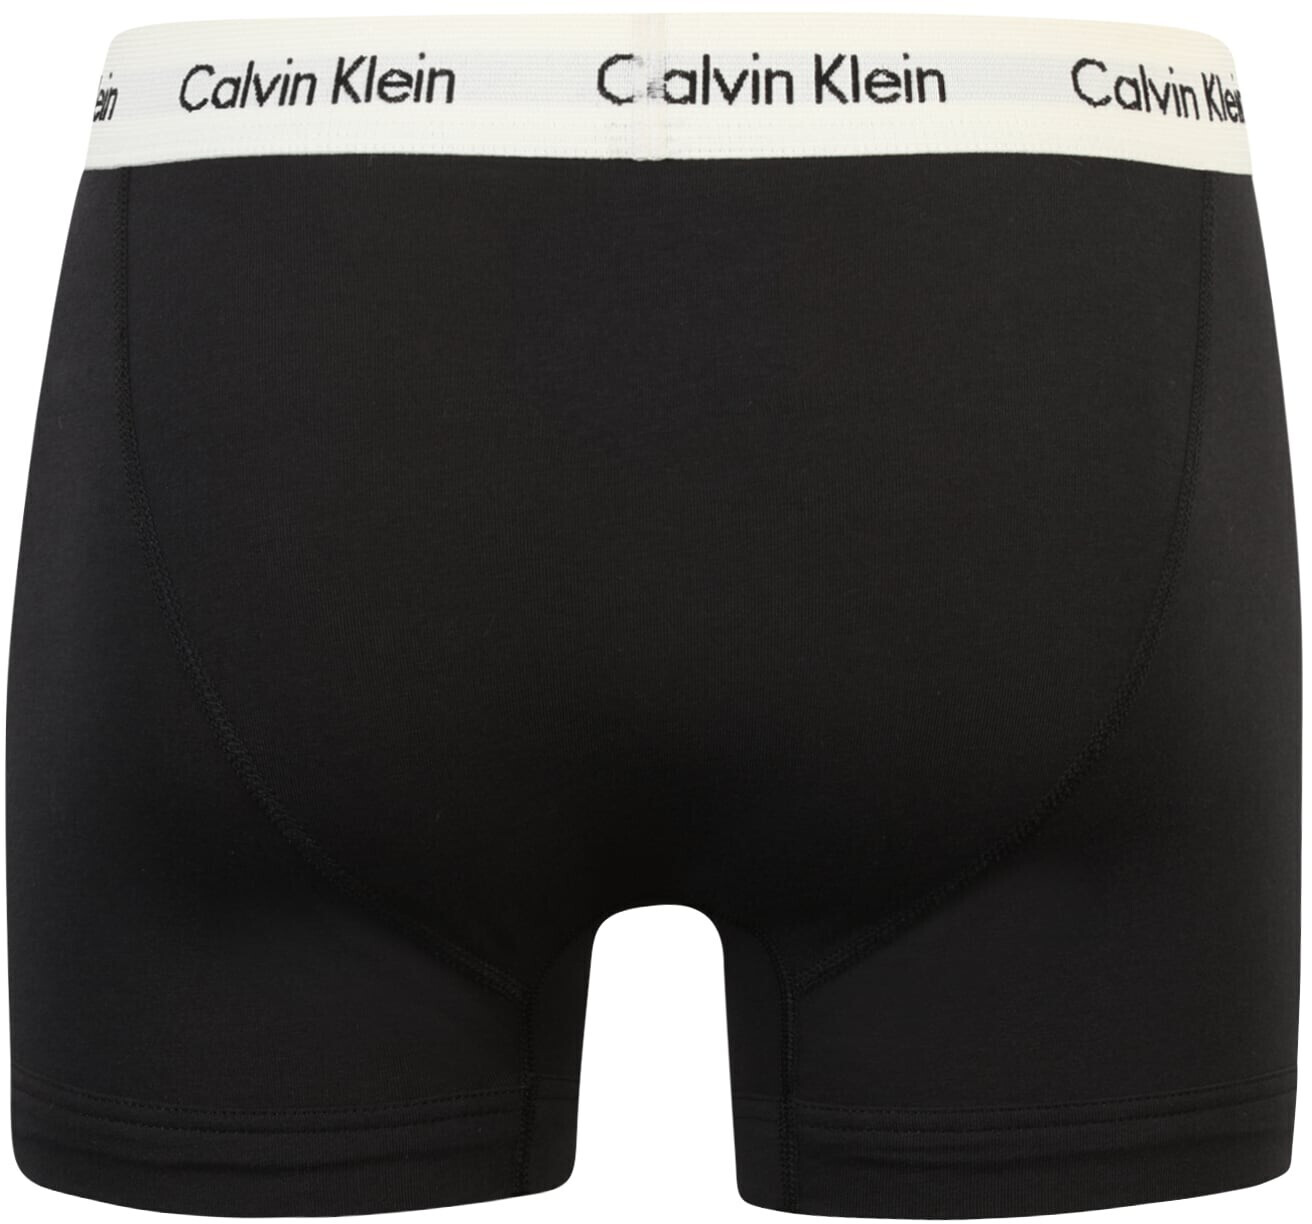 Buy Calvin Klein 3-Pack Shorts - Cotton Stretch black (U2662G-1UV) from  £32.00 (Today) – Best Deals on